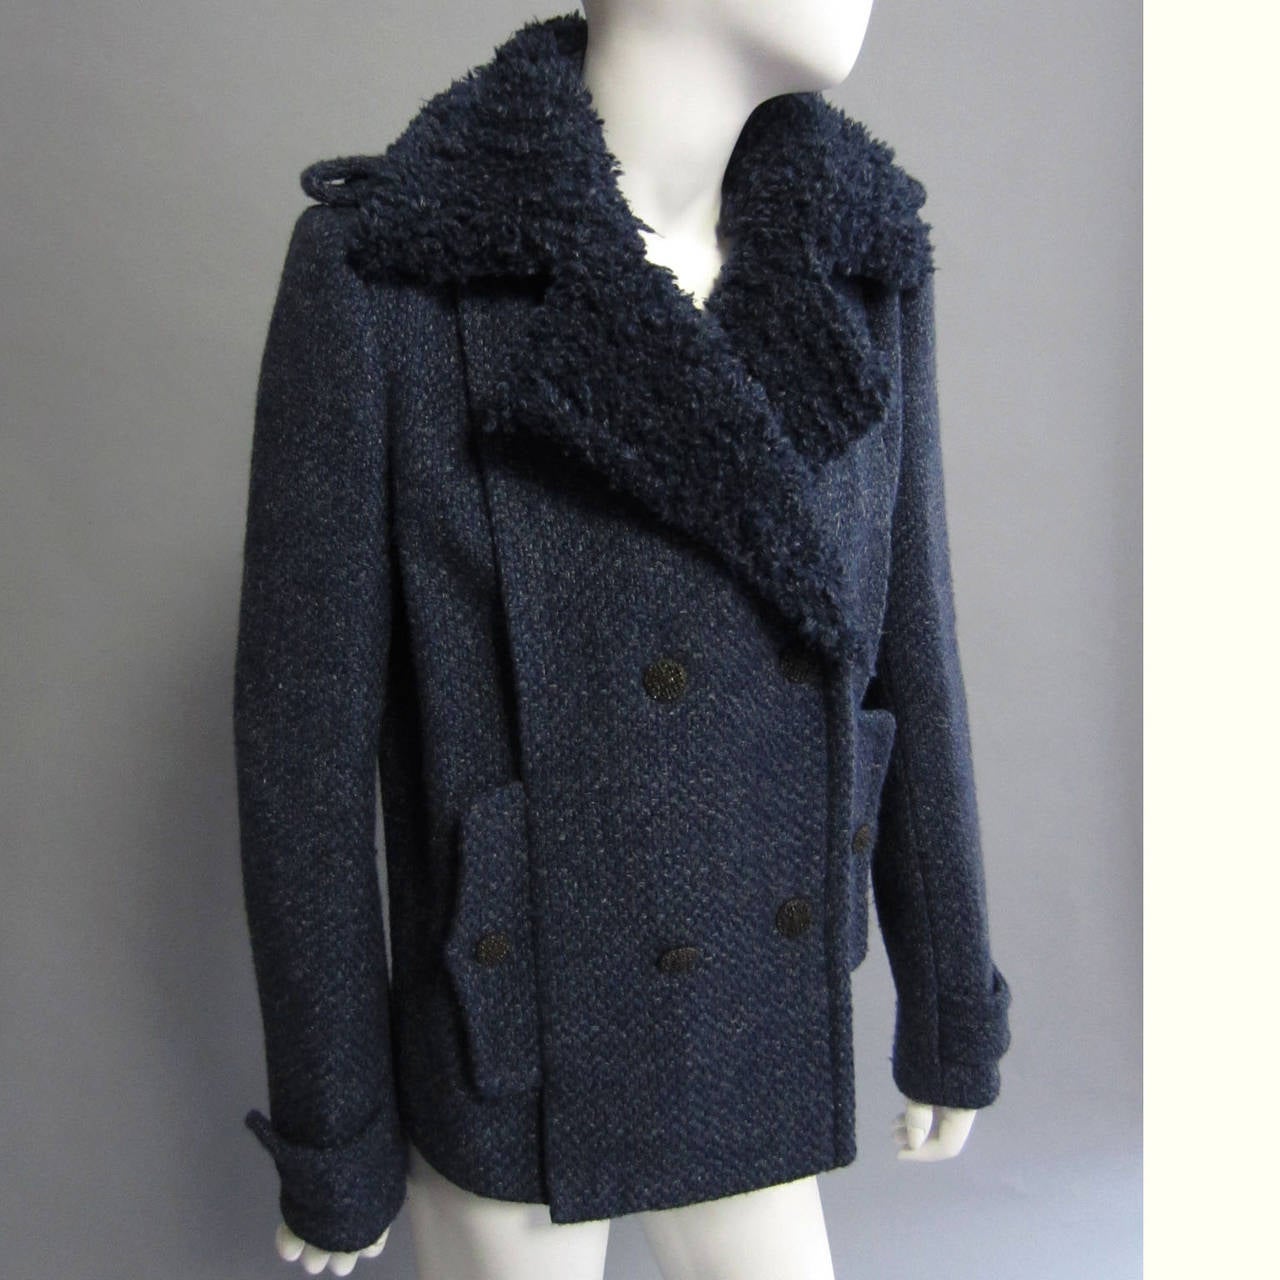 Authentic CHANEL, this coat is made of a blue and navy tweed. The richness of the color is accentuated on the collar; the wool is gathered and sheared to create a faux fur like trim. The double breasted closure showcases the intricate, CHANEL logo